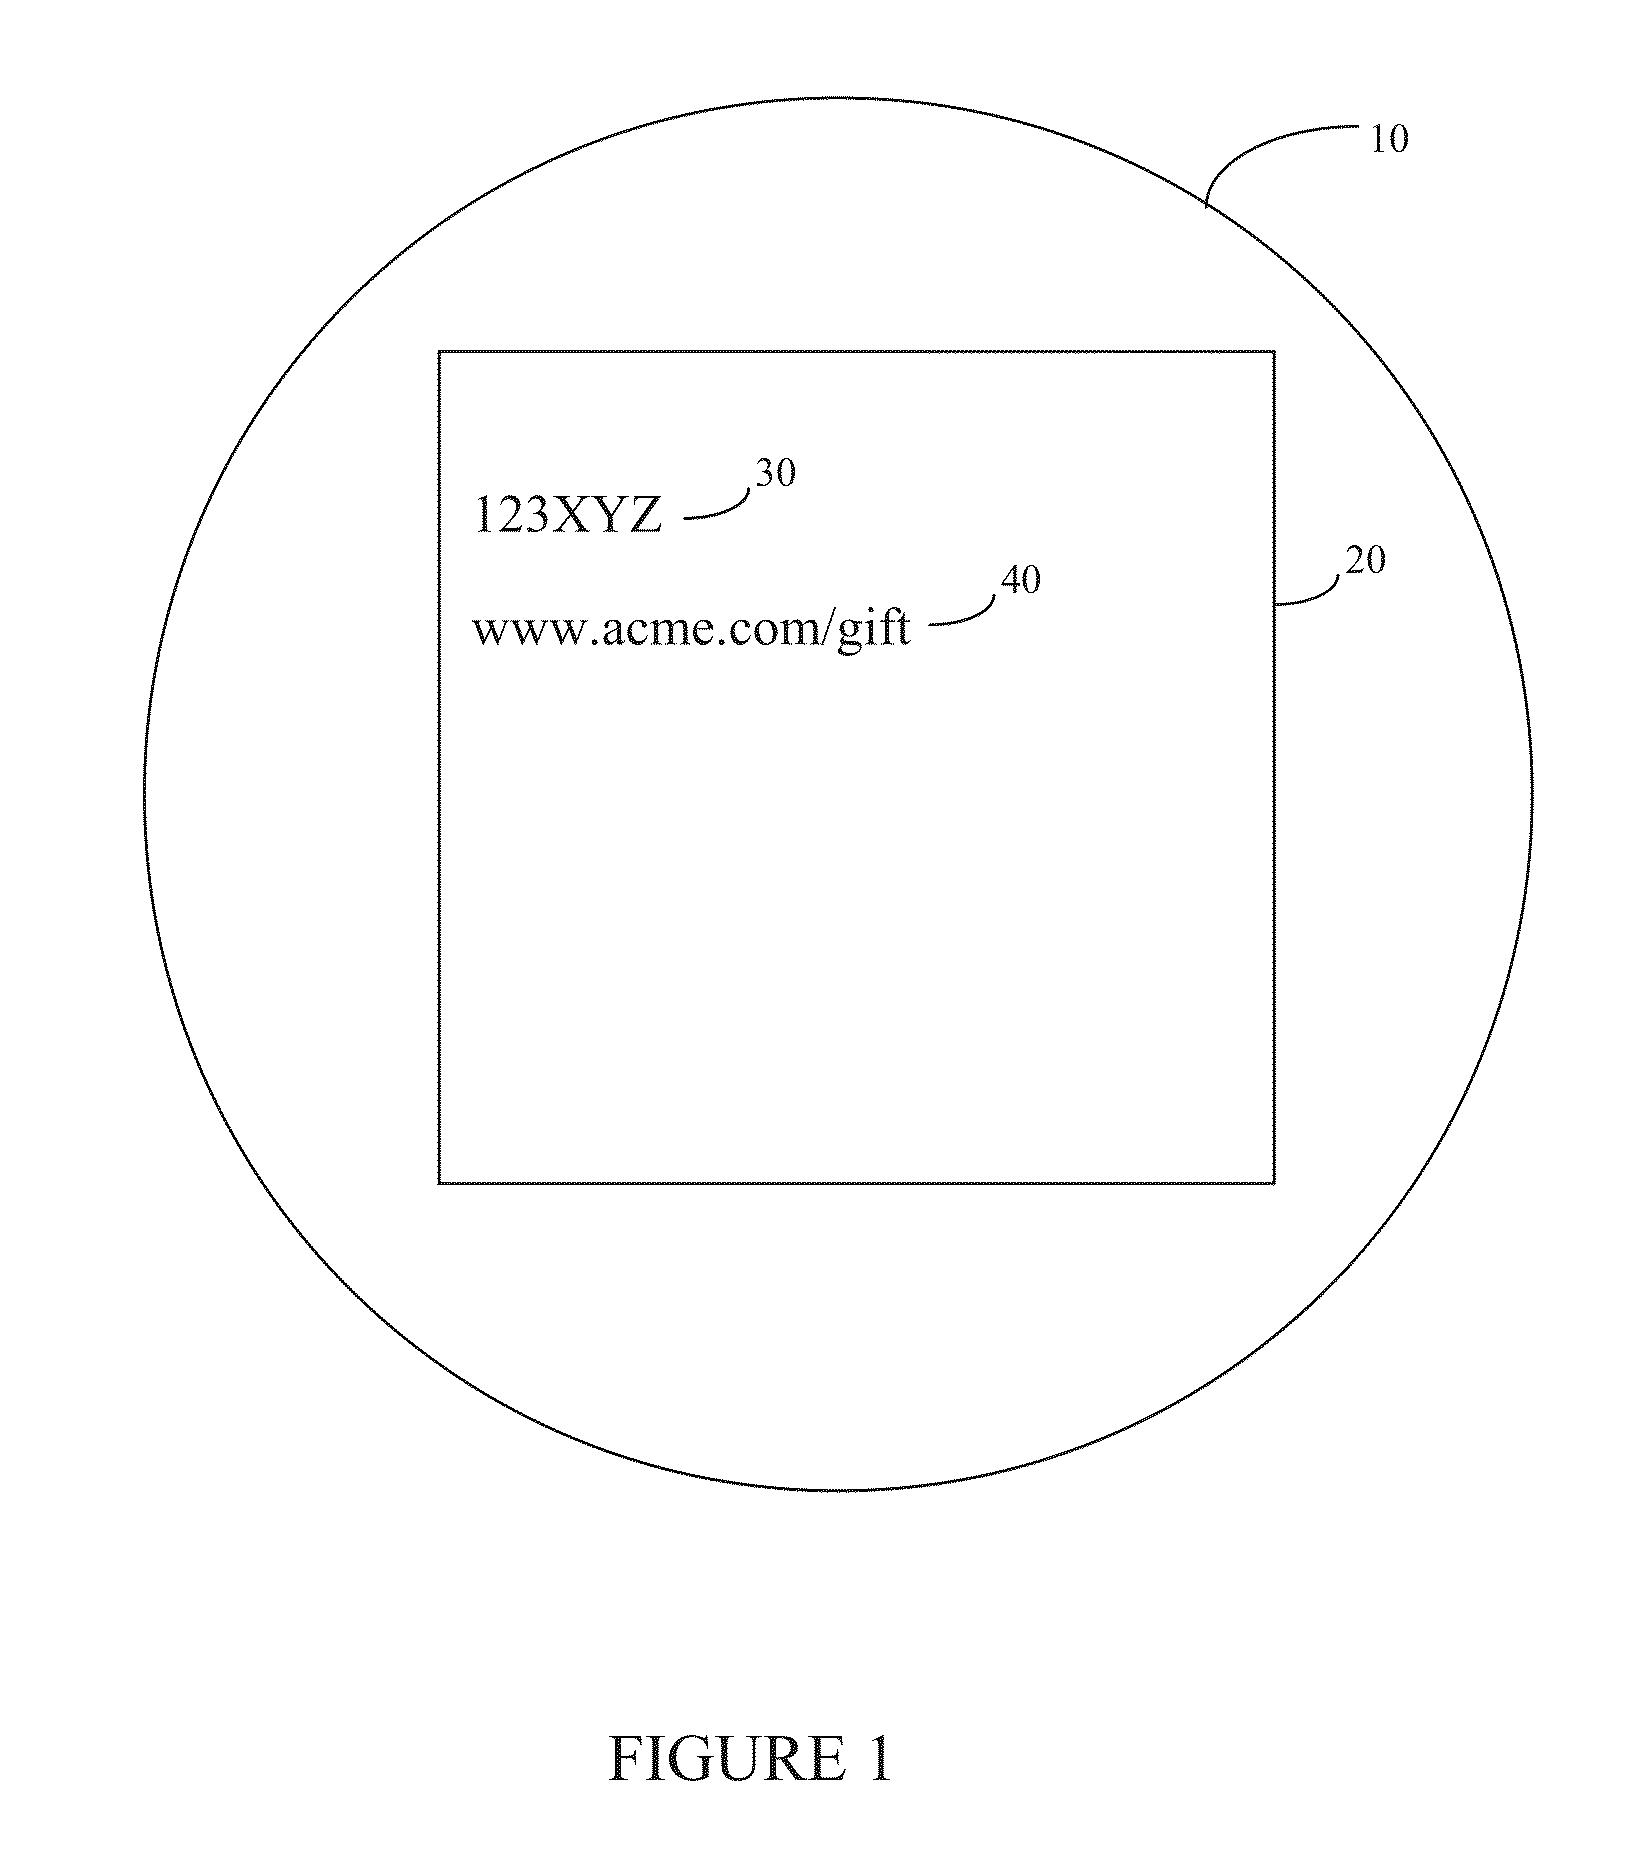 System and method for transference of rights to digital media via physical tokens